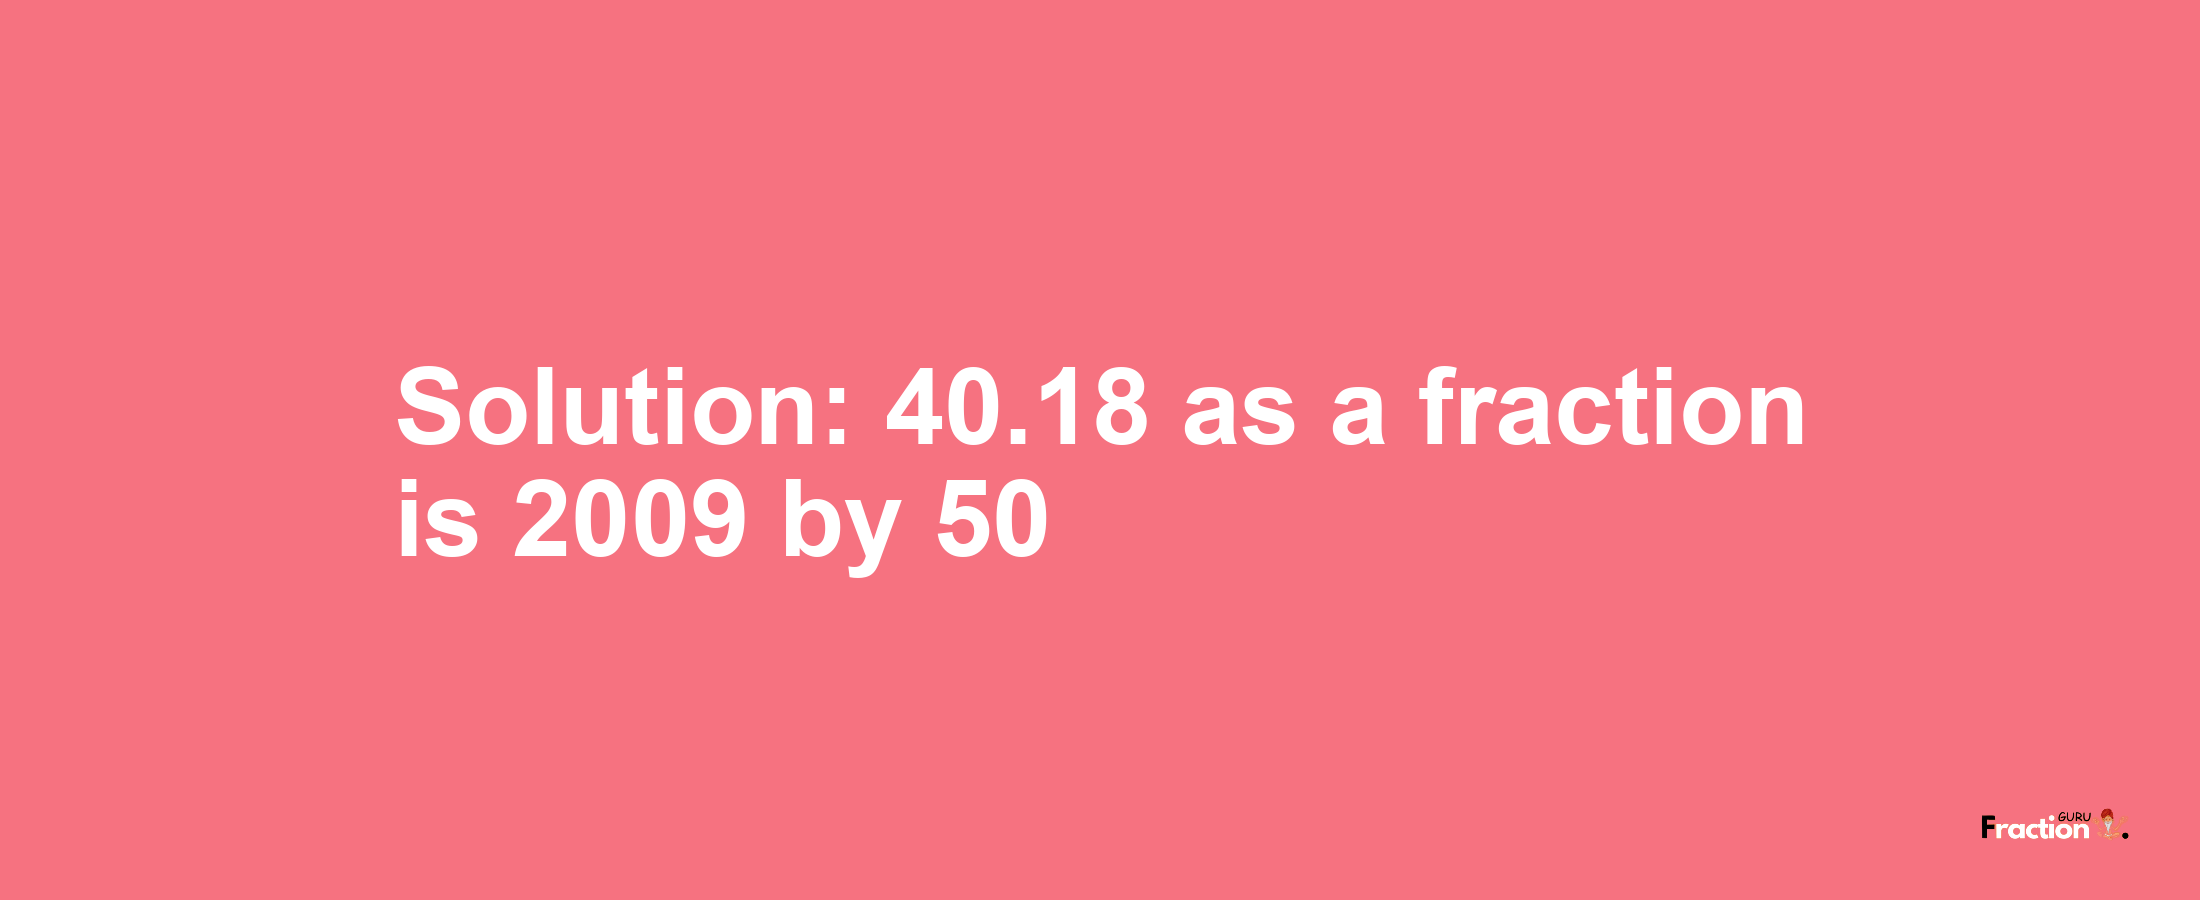 Solution:40.18 as a fraction is 2009/50